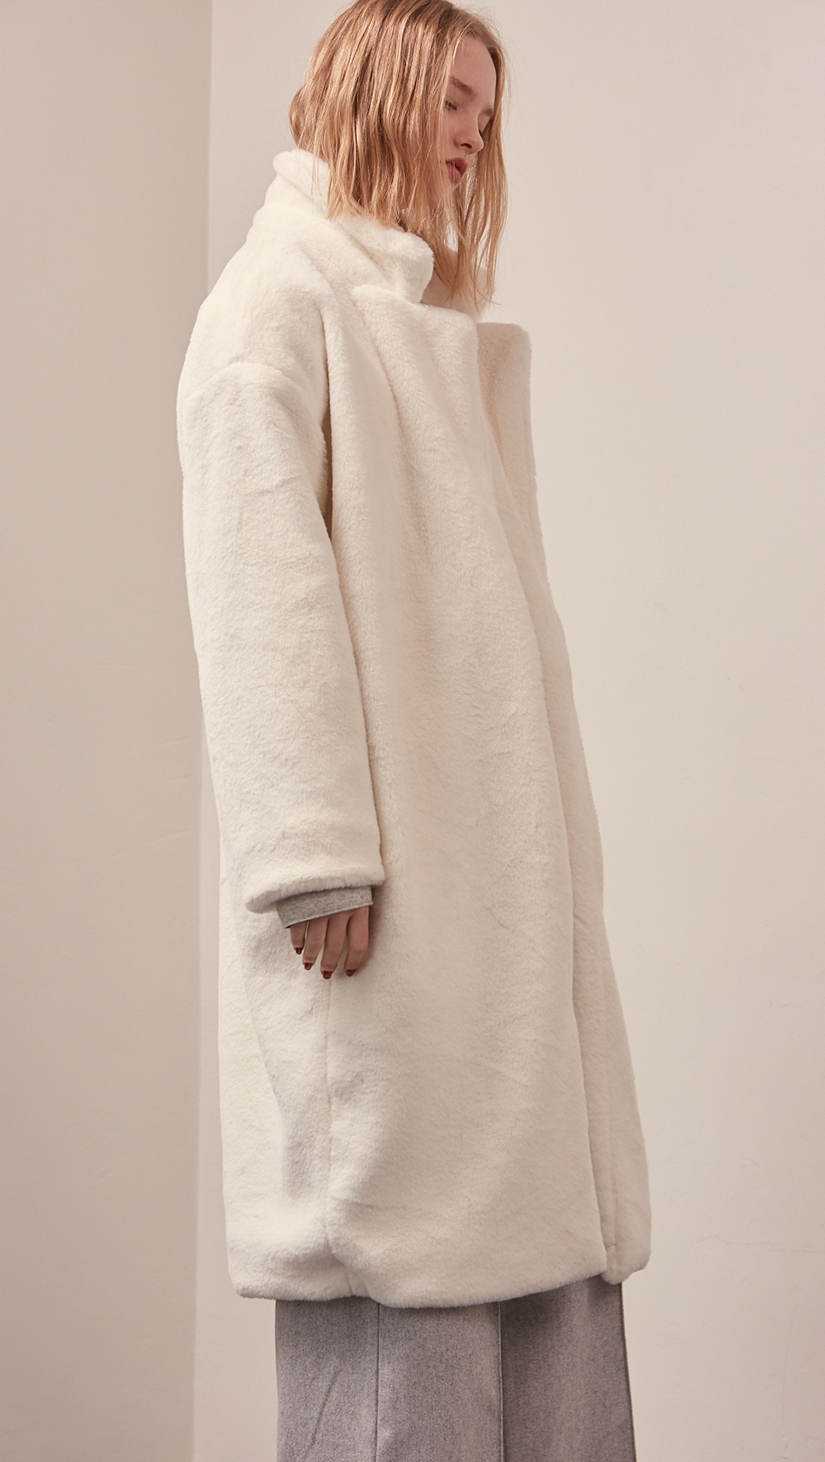 Stelen Shearling Coat in white. Super soft, notched collar, dropped shoulder, long sleeve. Open front. Fully lined. Relaxed silhouette.